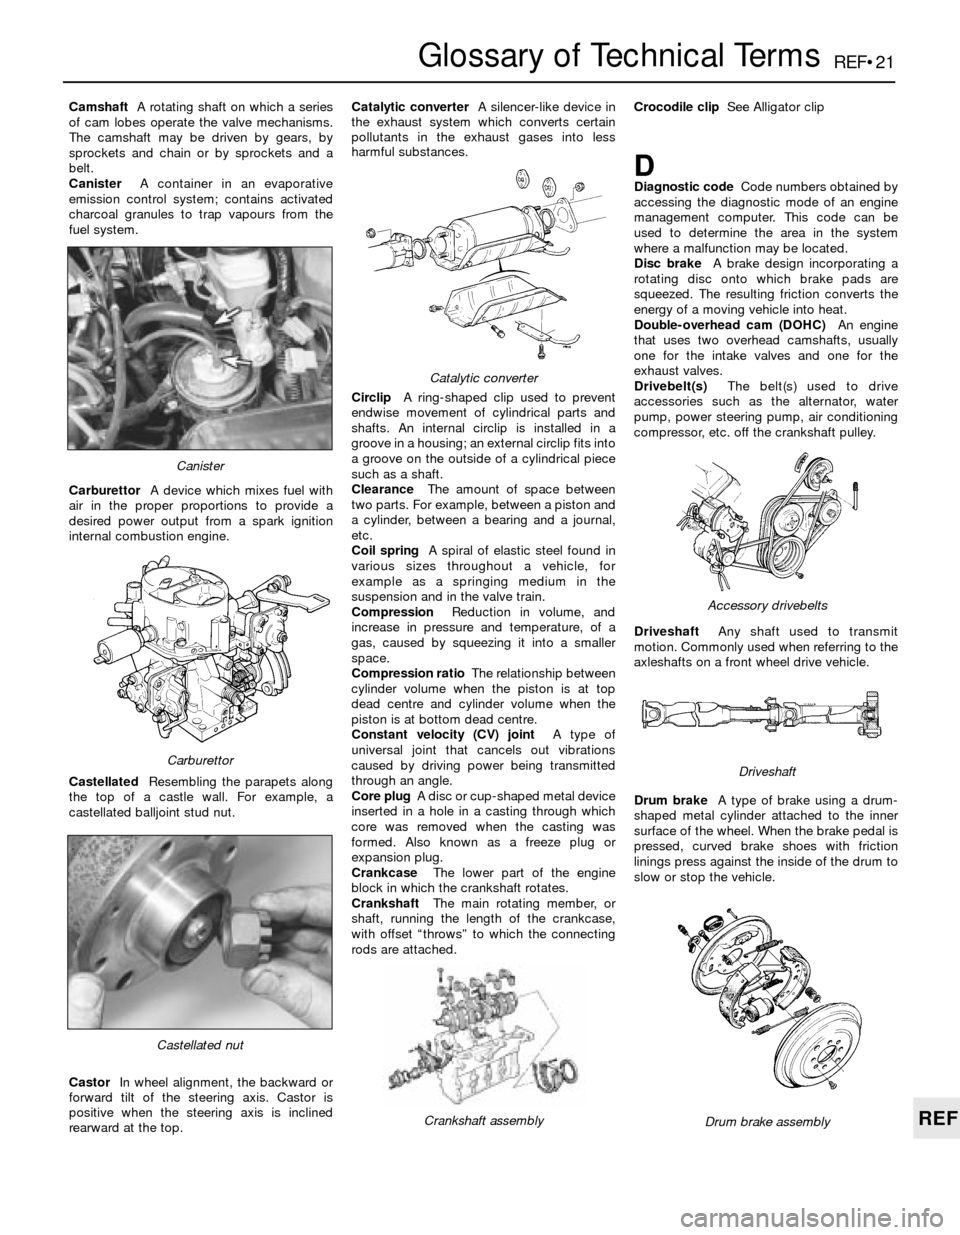 BMW 3 SERIES 1988 E30 Repair Manual REF•21
REF
Glossary of Technical Terms
CamshaftA rotating shaft on which a series
of cam lobes operate the valve mechanisms.
The camshaft may be driven by gears, by
sprockets and chain or by sprocke